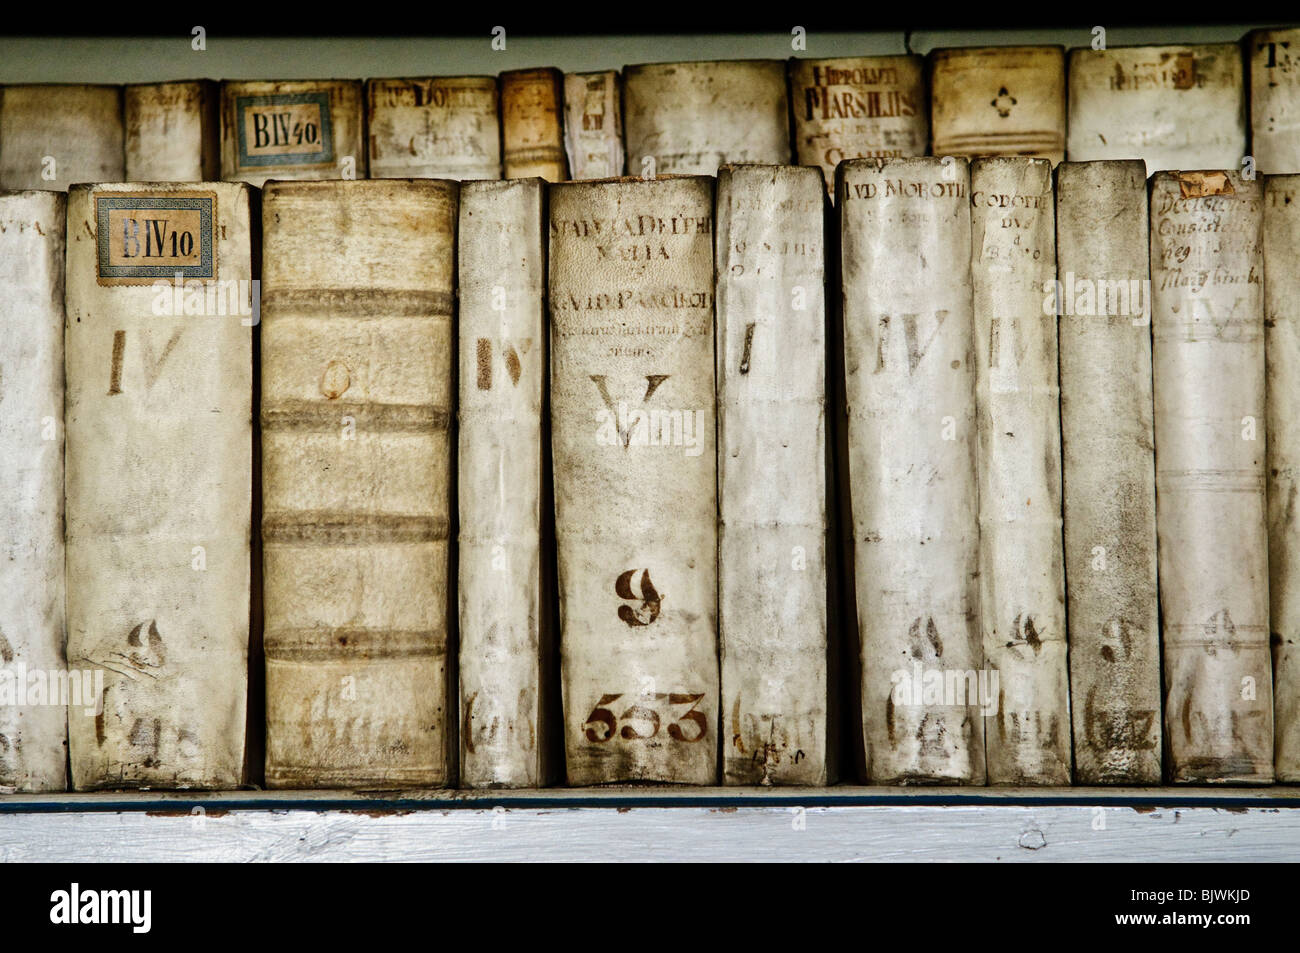 PRAGUE, Czech Republic - Very old books in the collection of the Strahov Library. Stock Photo